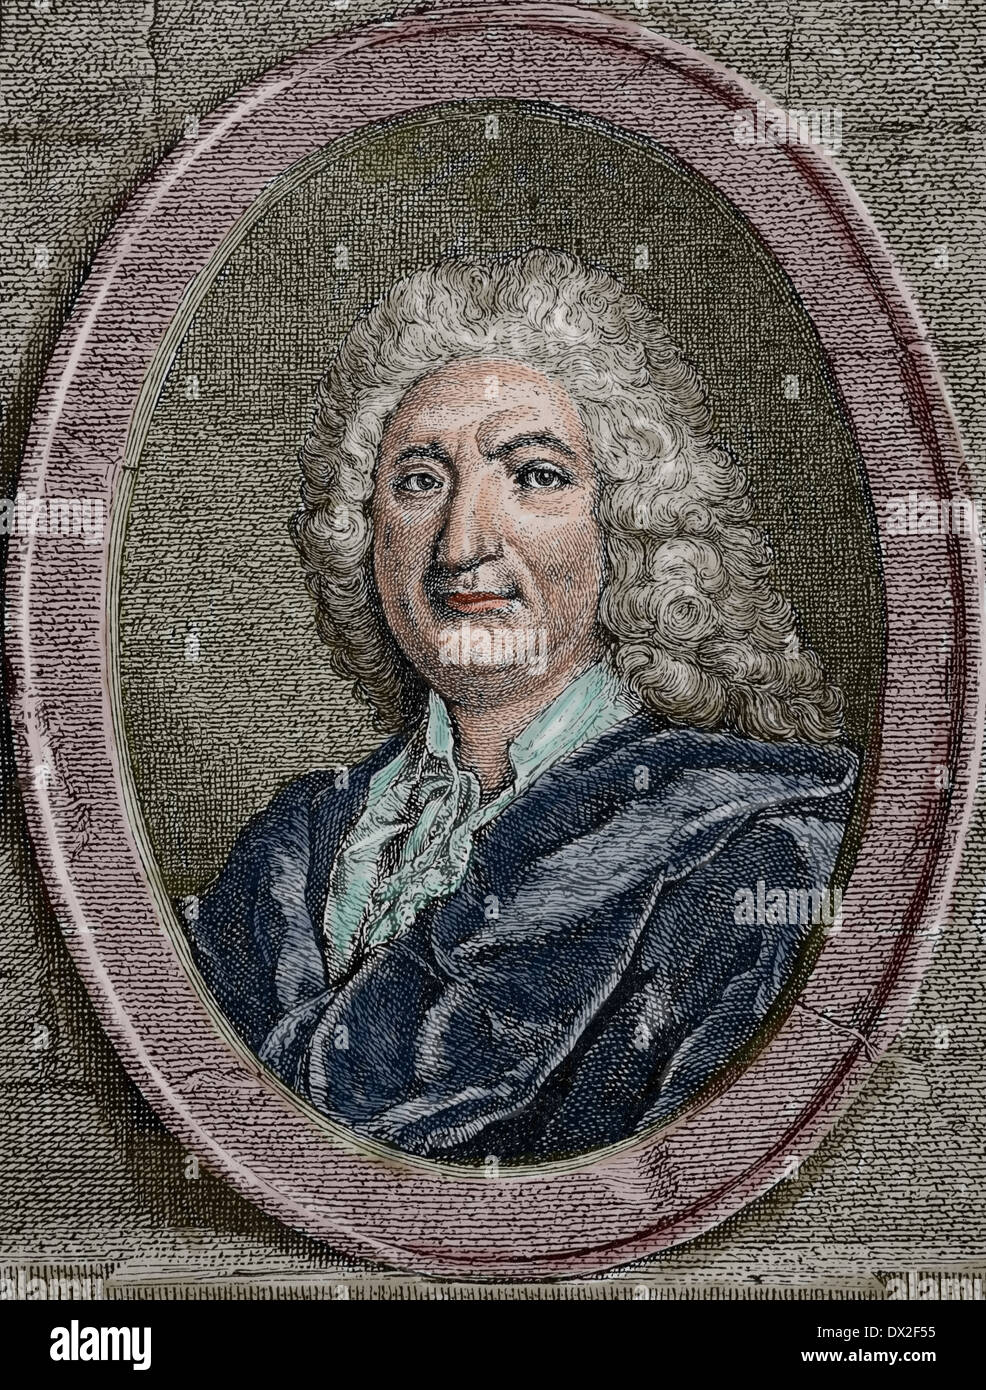 Alain-Rene Lesage (1668- 1747). French novelist and playwright. Best known for picaresque novel Gil Blas. Engraving. Colored. Stock Photo